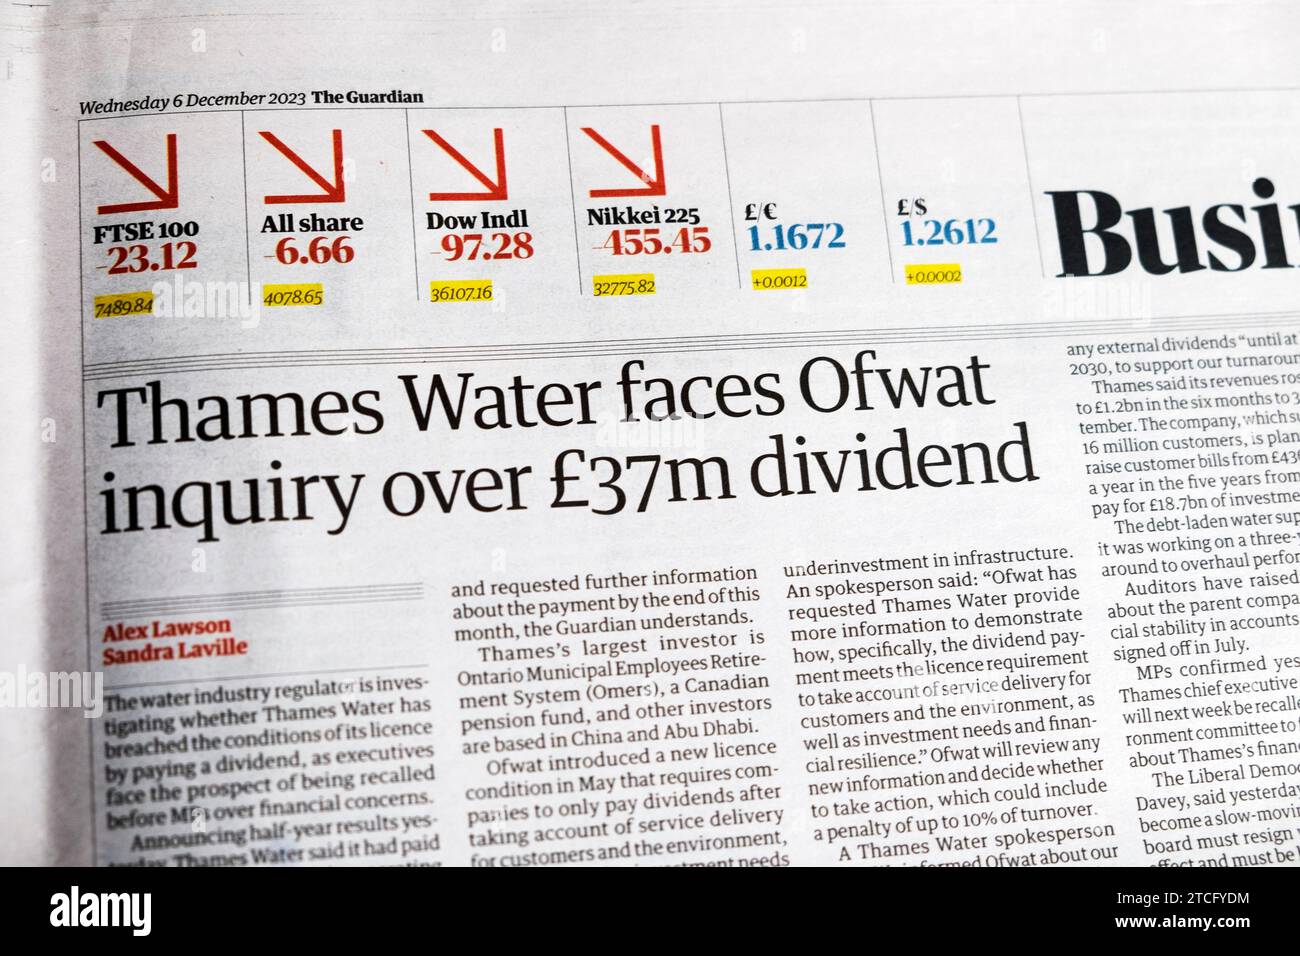 "Thames Water Faces Ofwat Inquisition over £37m dividend" Guardian Newspaper headline business article 6 December 2023 Londra Inghilterra Regno Unito Gran Bretagna Foto Stock